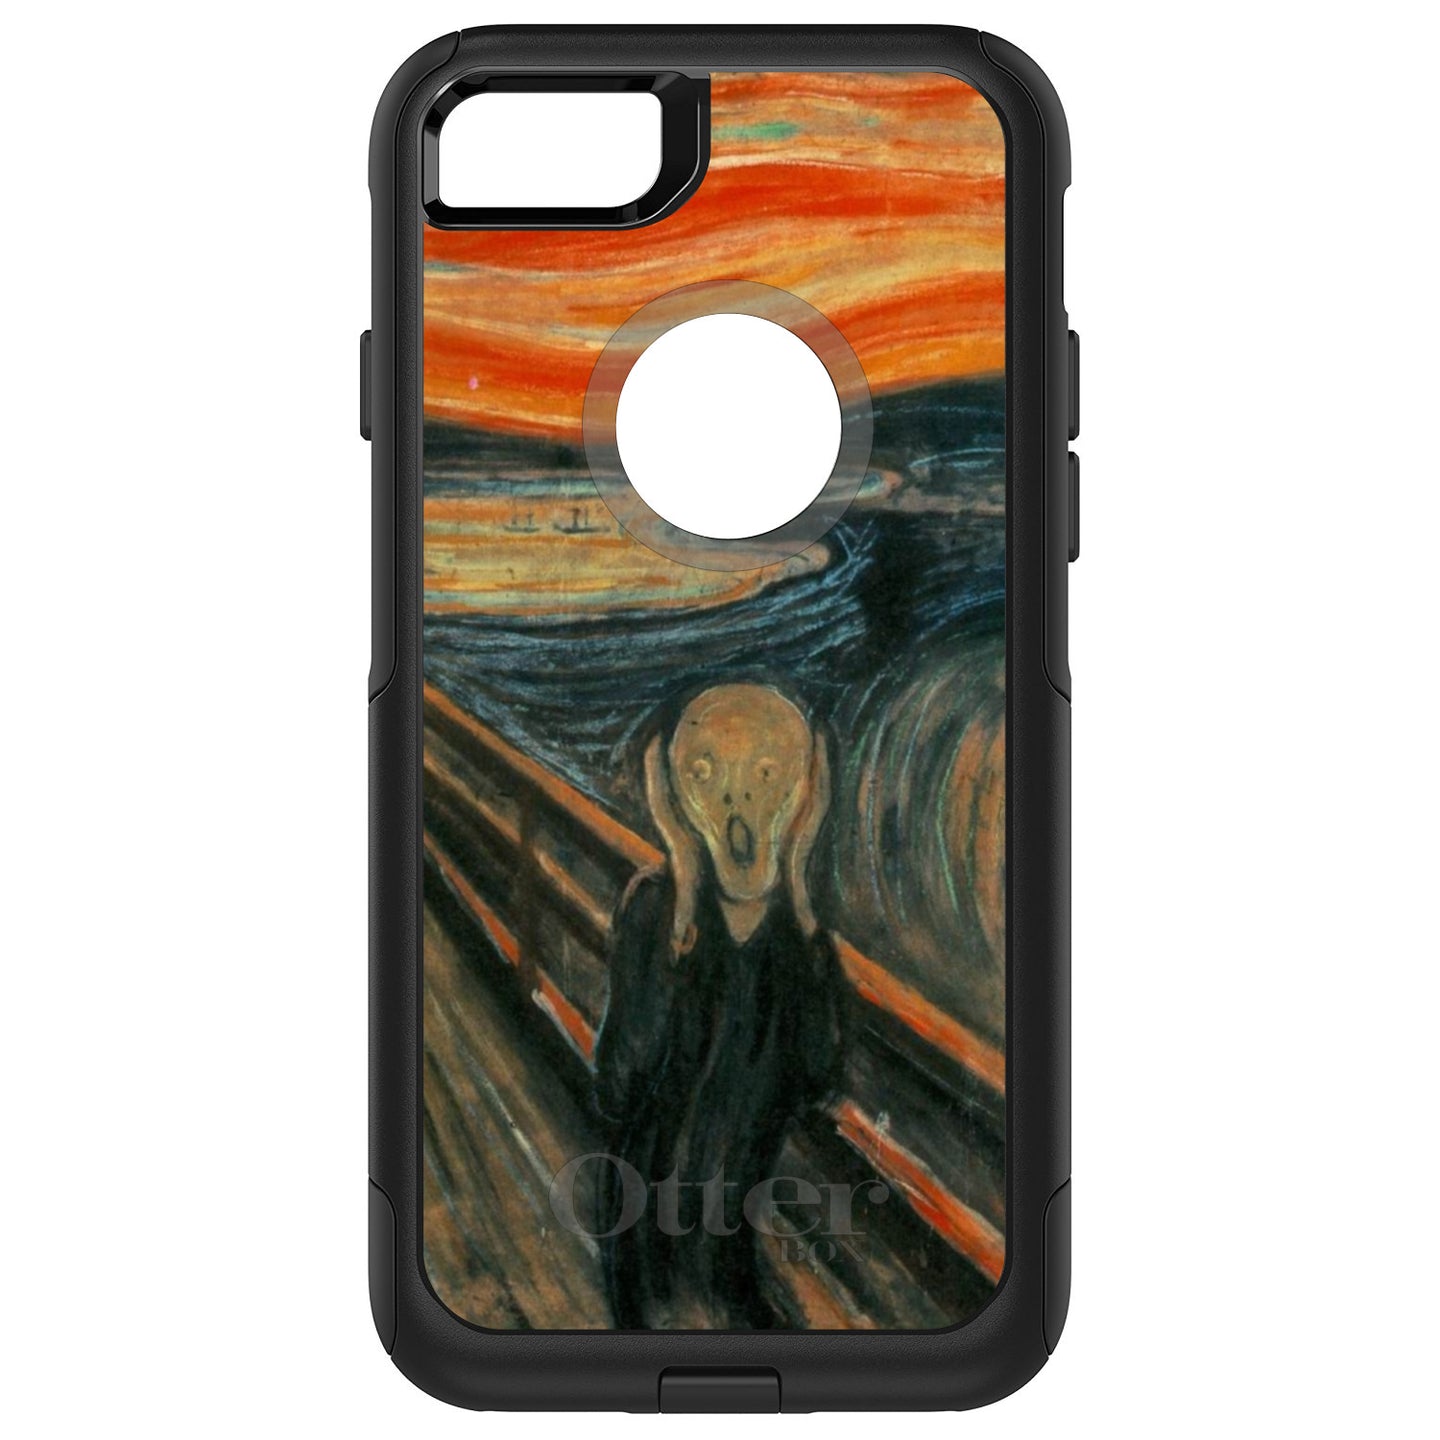 DistinctInk™ OtterBox Commuter Series Case for Apple iPhone or Samsung Galaxy - Edvard Munch The Scream